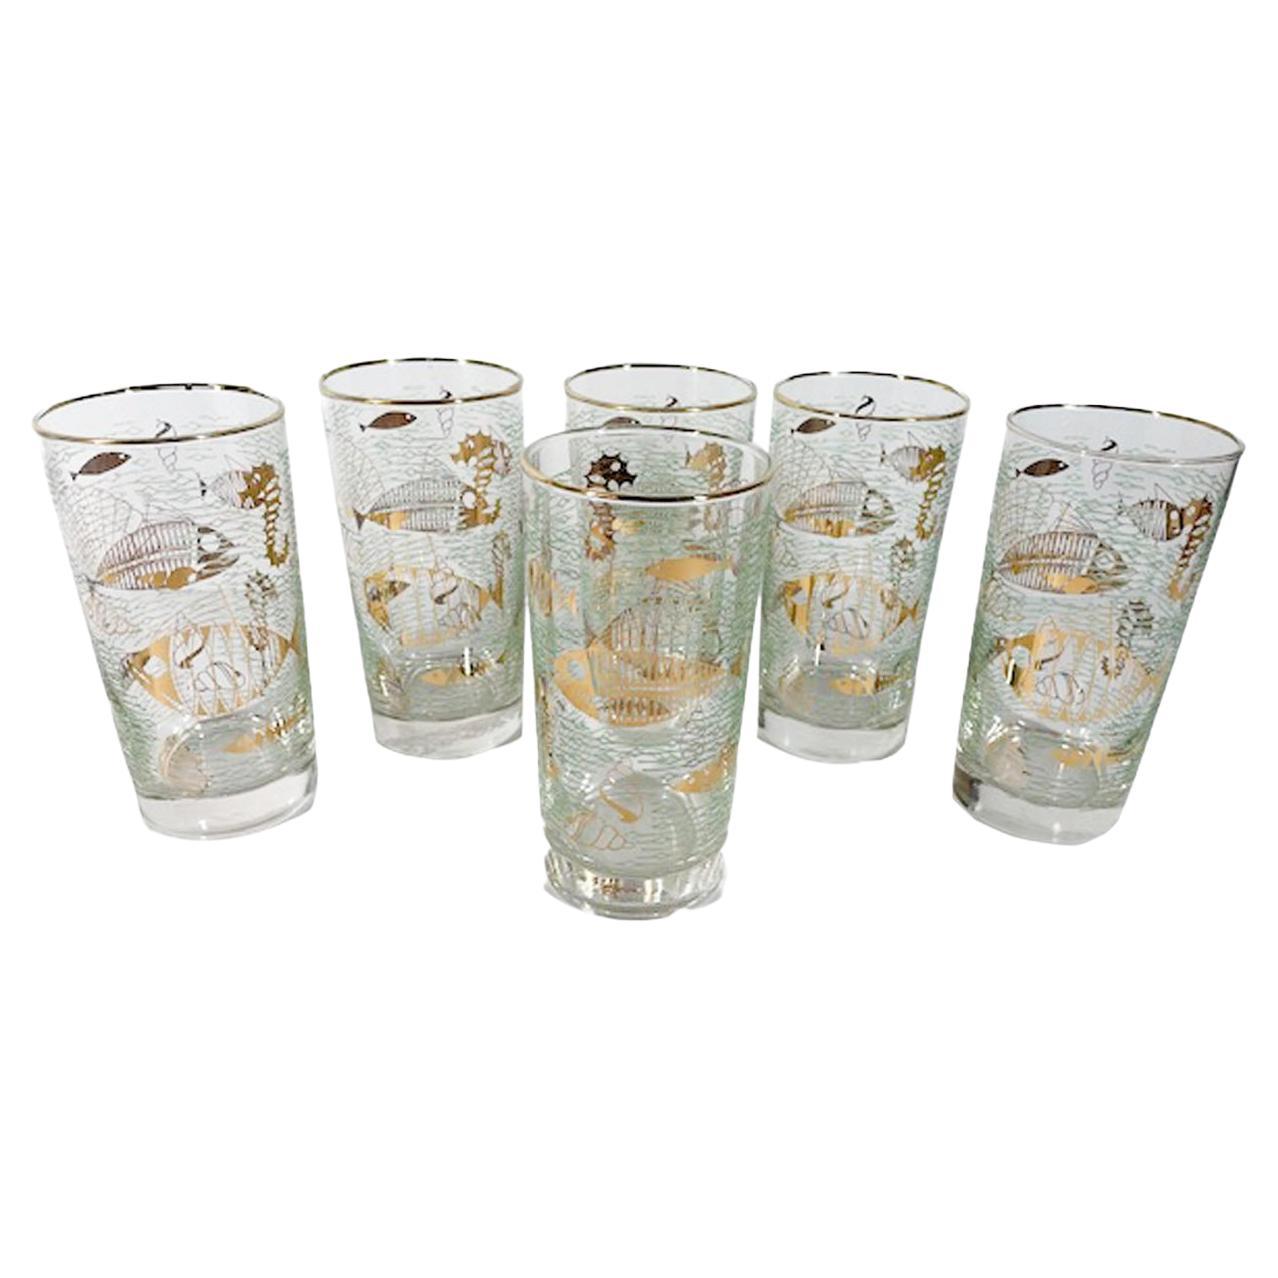 Libbey Glass Co - 46 For Sale at 1stdibs | antique libbey glasses 